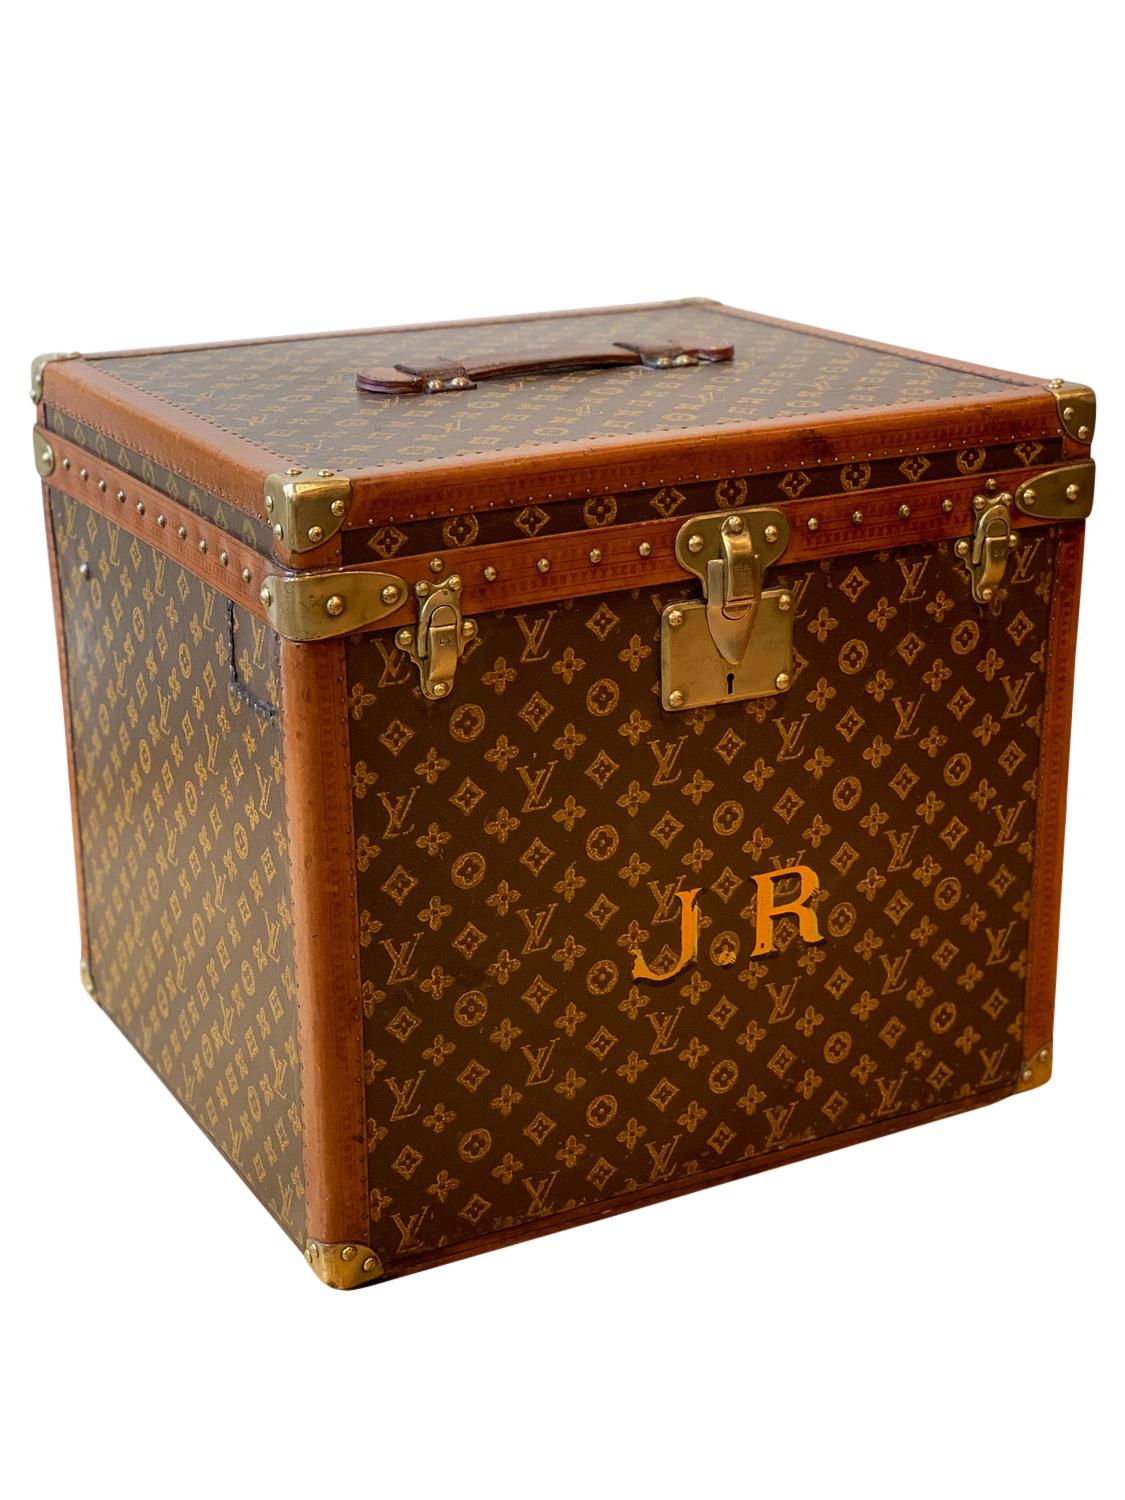 A Louis Vuitton Hatbox, circa 1930, in monogrammed canvas with the initials J.R. front and centre. The condition of the hatbox is excellent with all original hardware and leather handle. Louis Vuitton worried about his clients and their hats on both